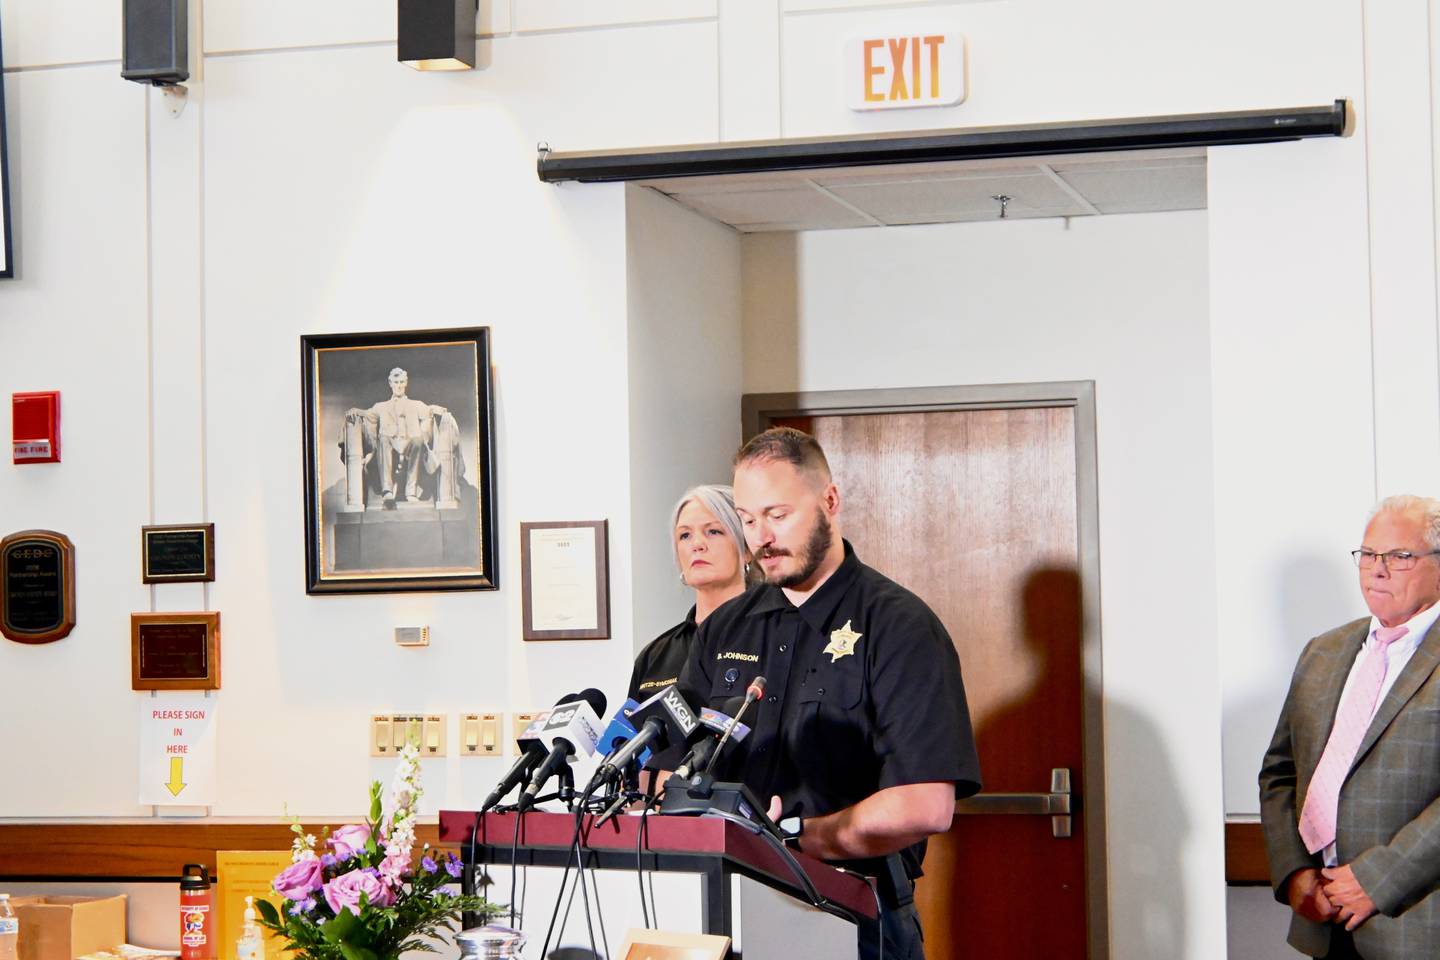 Deputy Chief Brandon Johnson explains at Thursday's press conference how he was able to identify JoAnn. "Vicki" Black-smith.